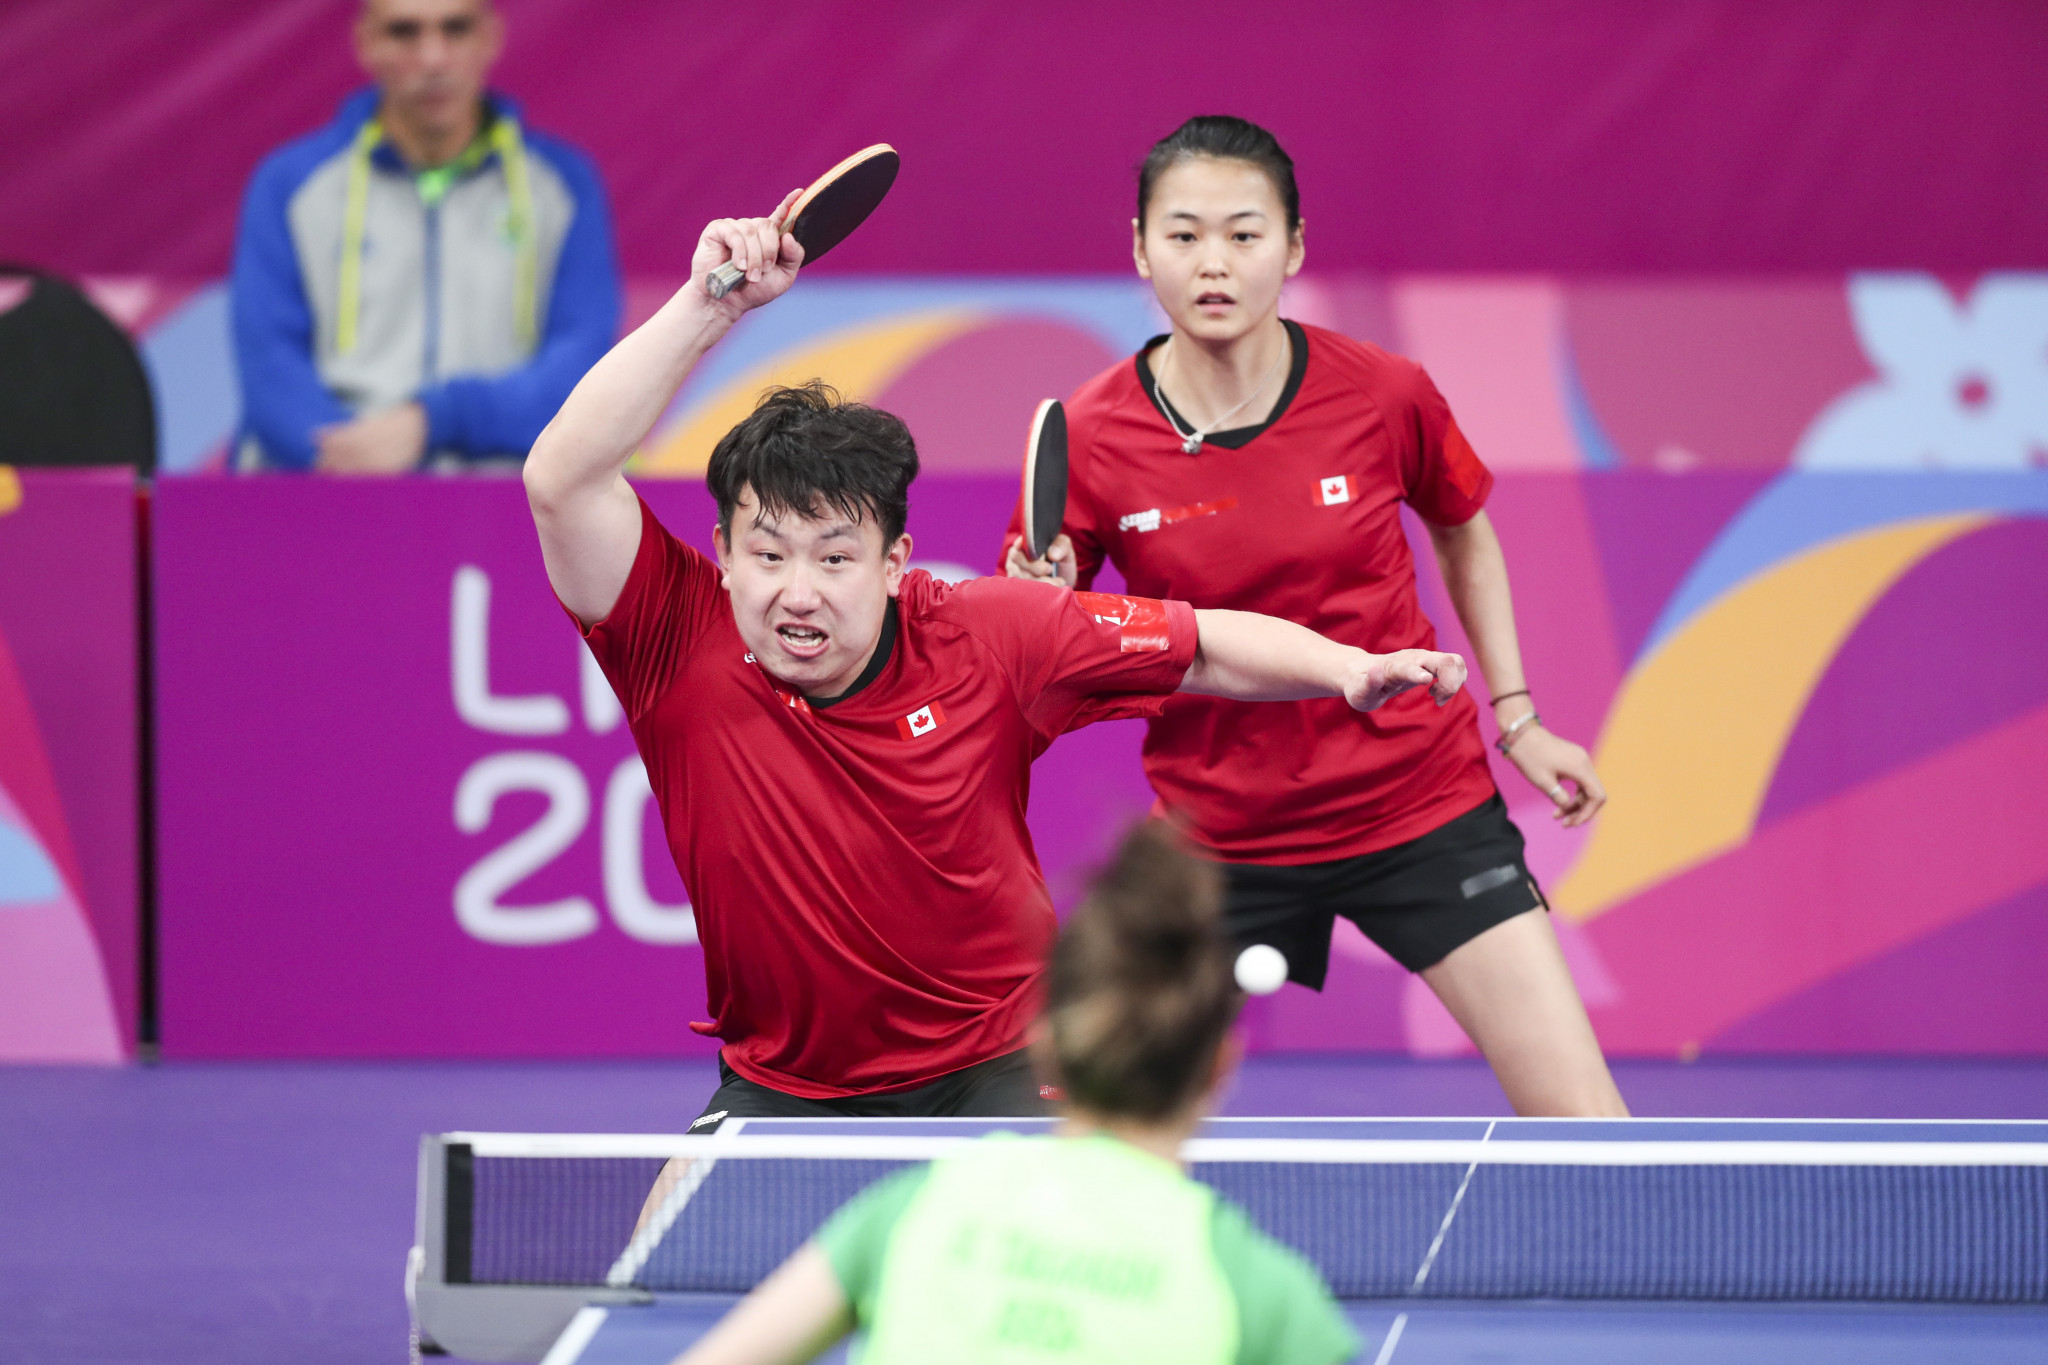 Canada enjoyed something of a goldrush, with Eugene Wang and Mo Zhang claiming the mixed doubles table tennis title ©Lima 2019